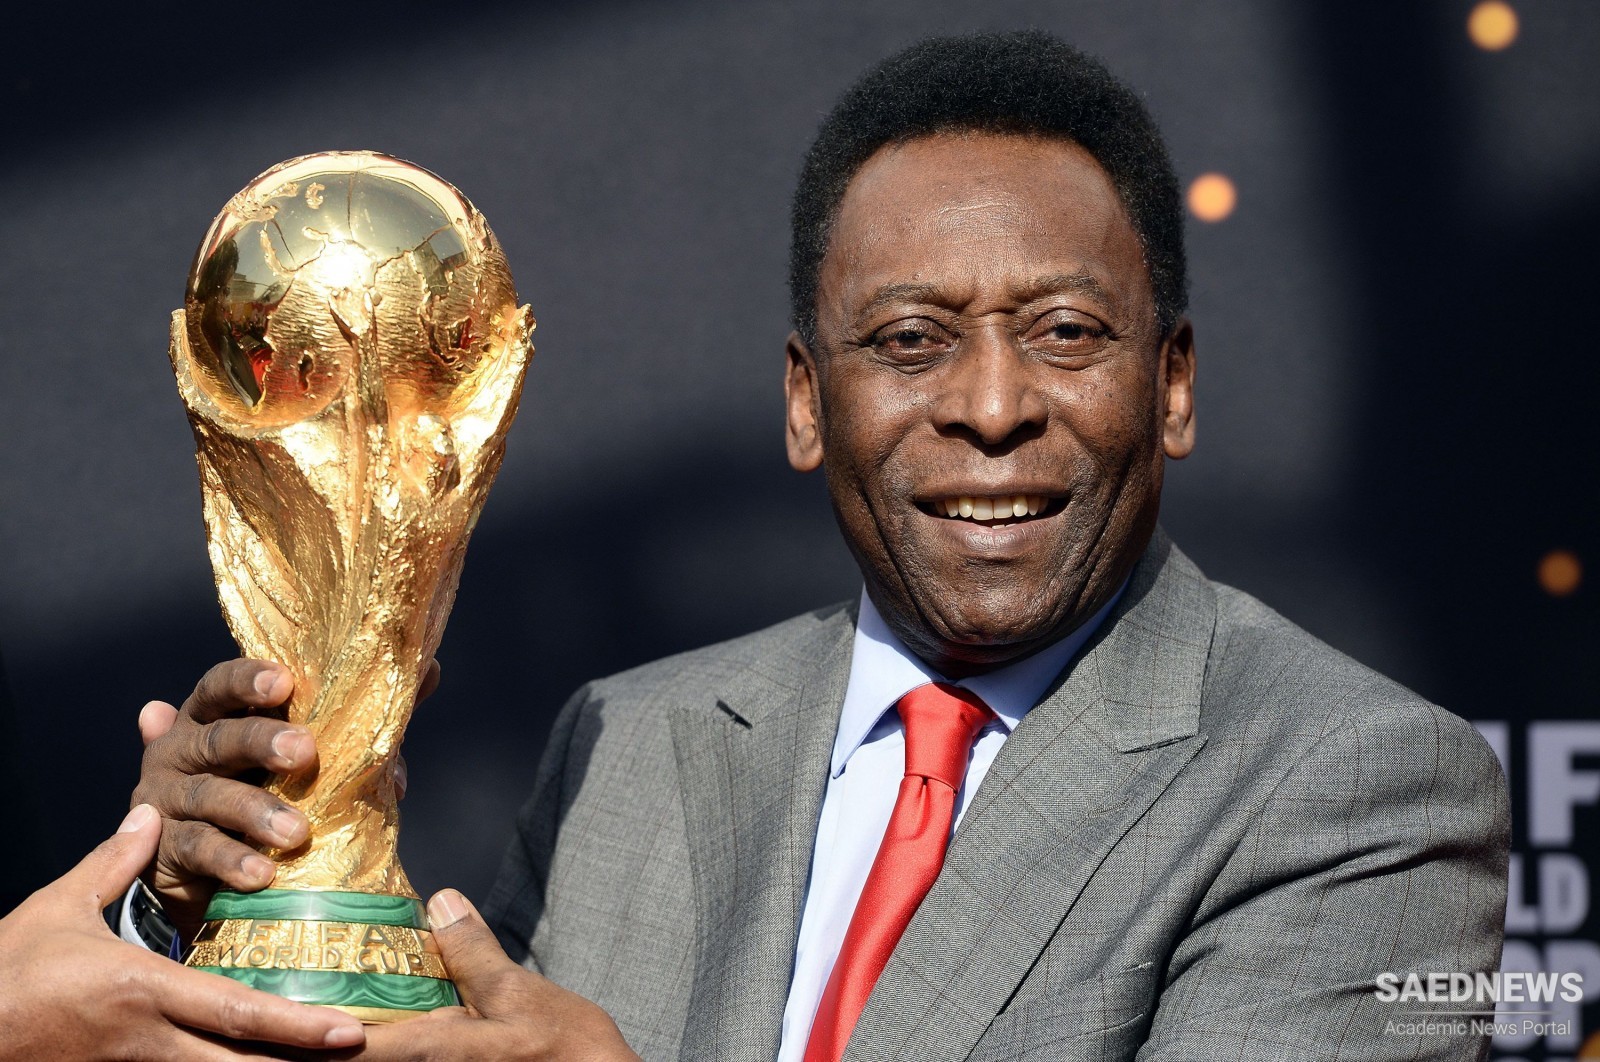 Pelé Takes Part in His Own Funeral